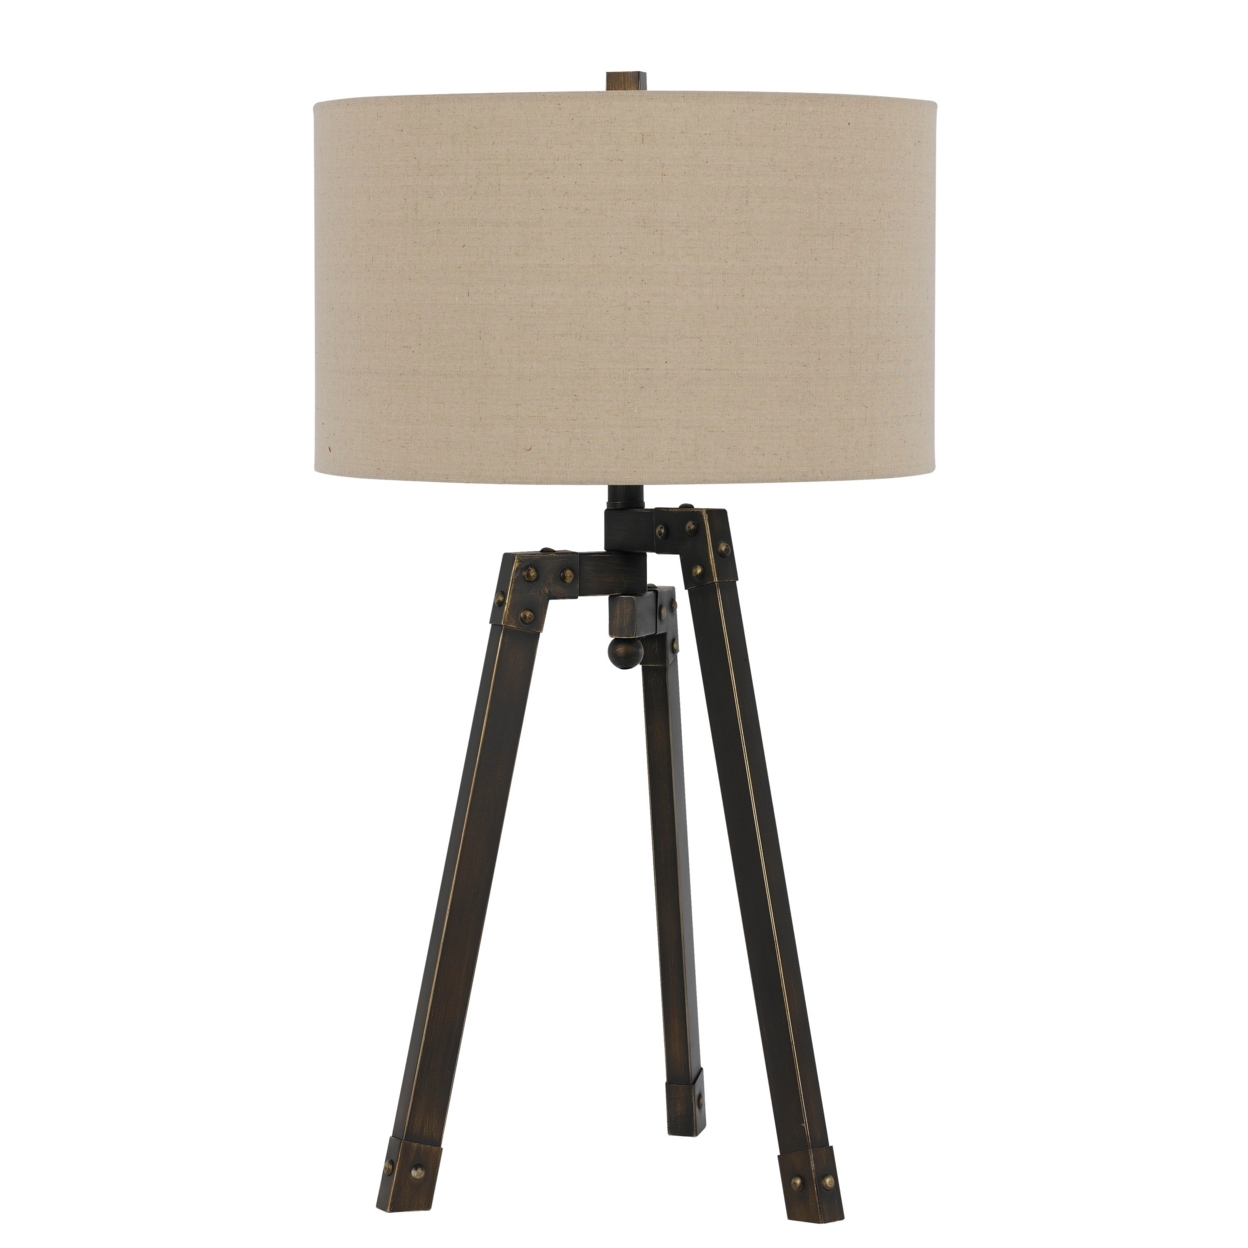 Metal Tripod Base Table Lamp With Fabric Drum Shade, Bronze And Beige- Saltoro Sherpi